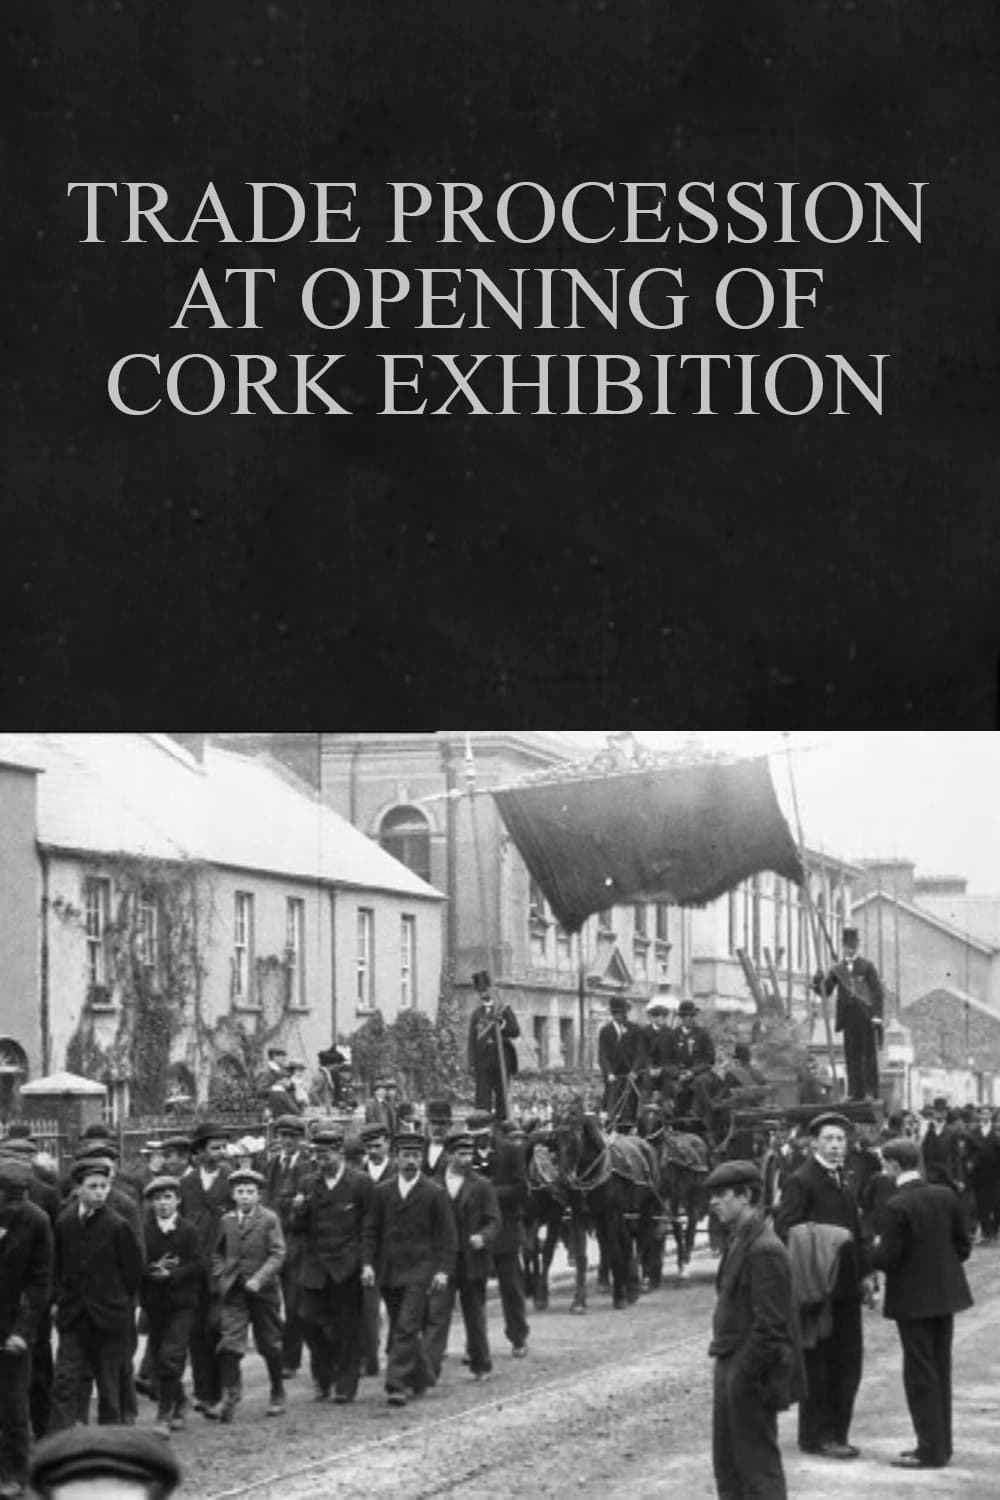 Trade Procession at Opening of Cork Exhibition